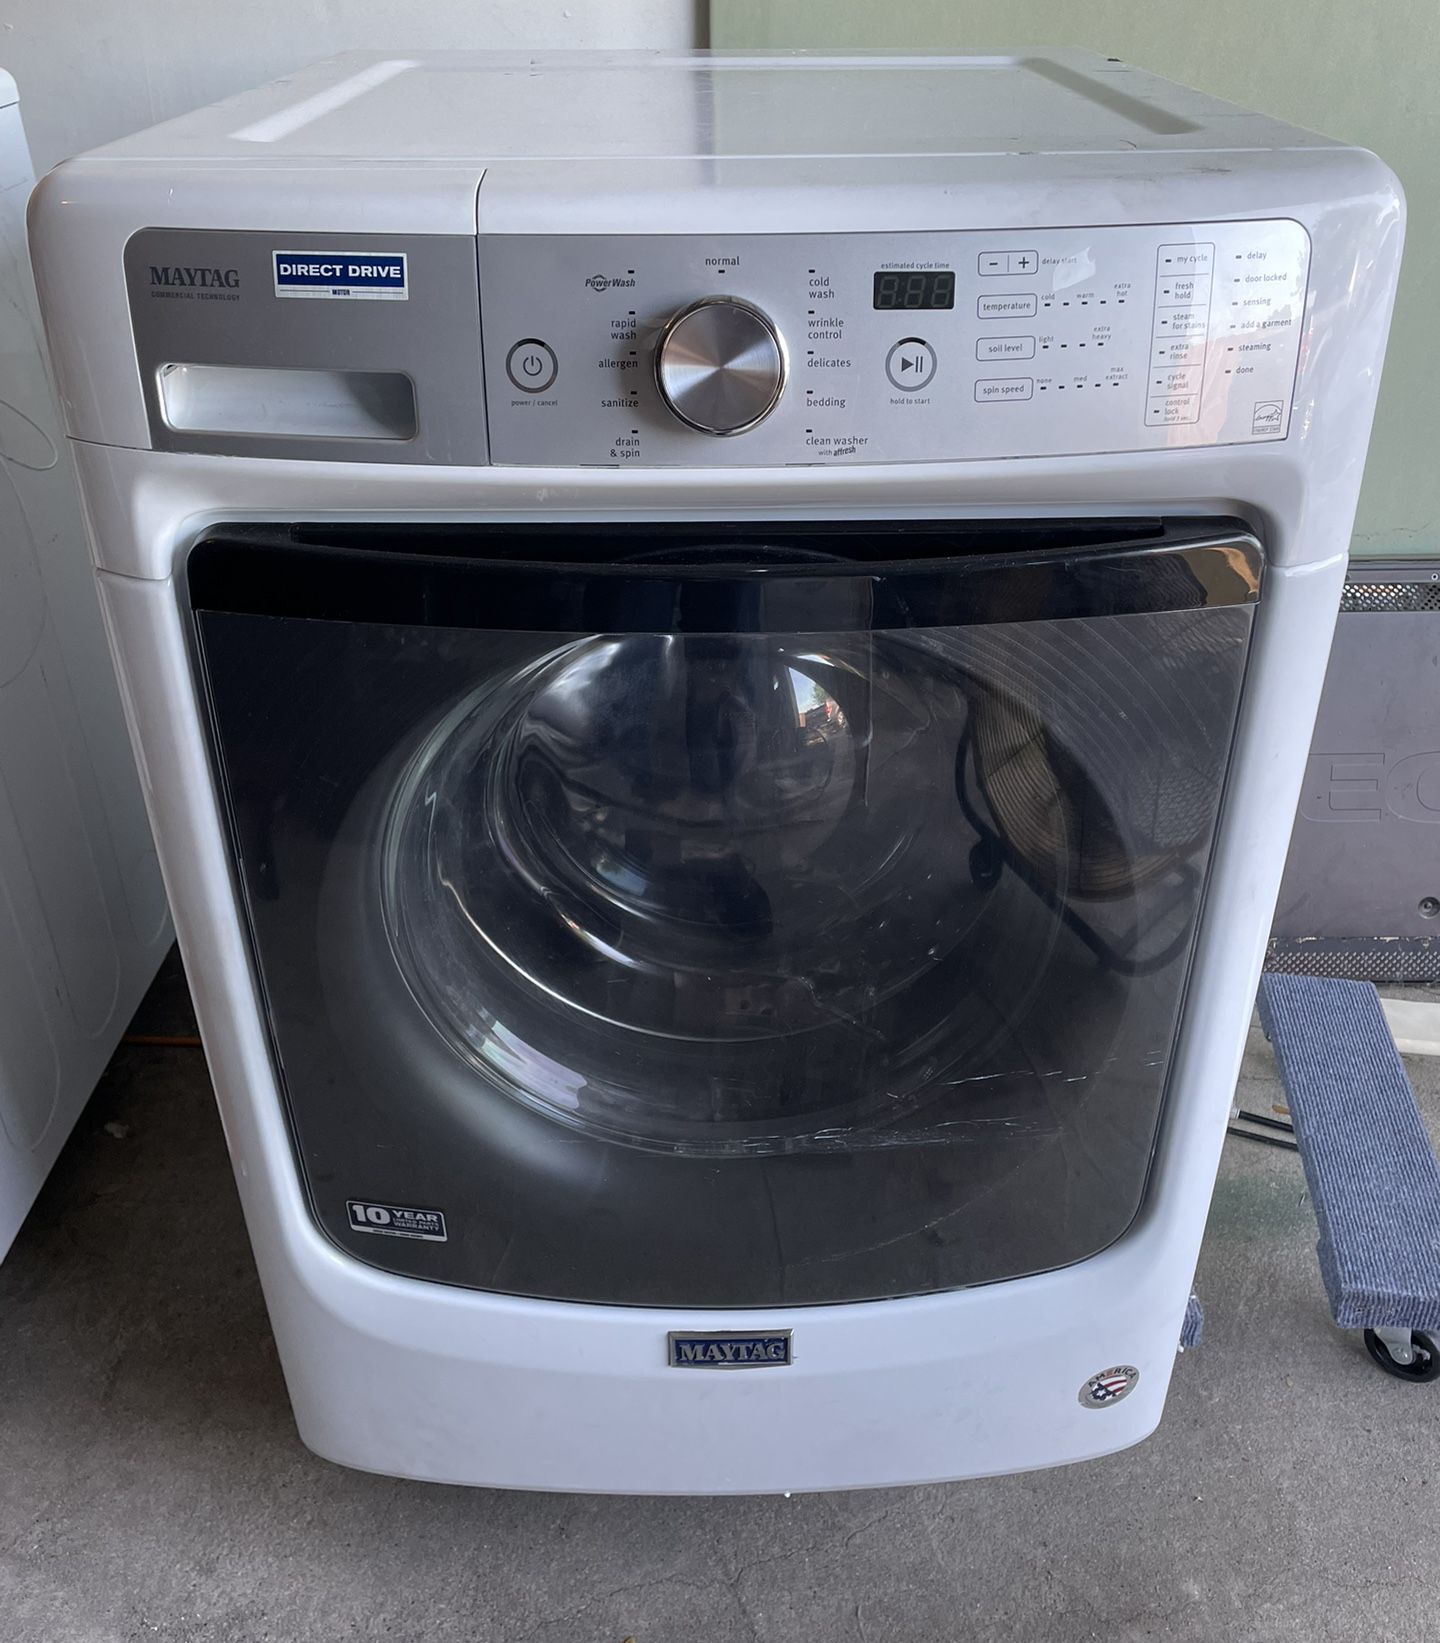 How To Fix The Error Code F31 For Maytag Washing Machine